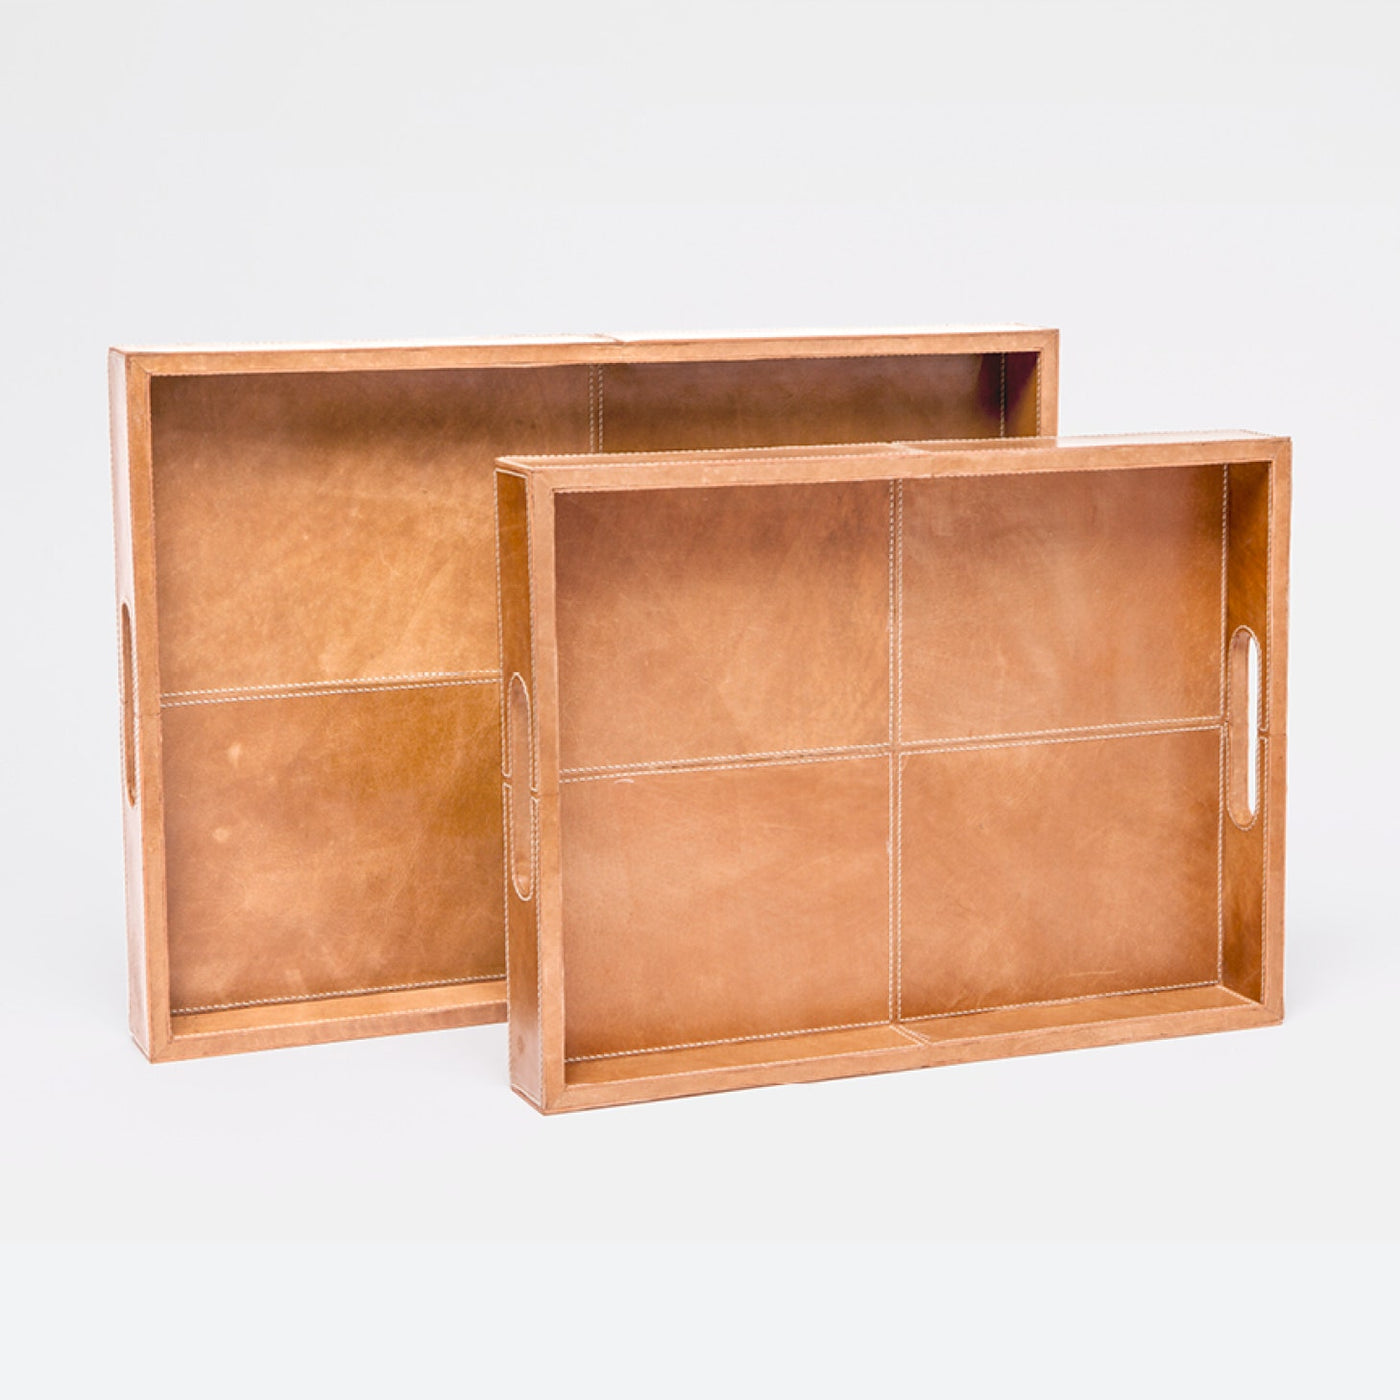 TRAY AGED CAMEL LEATHER (Available in 2 Sizes)